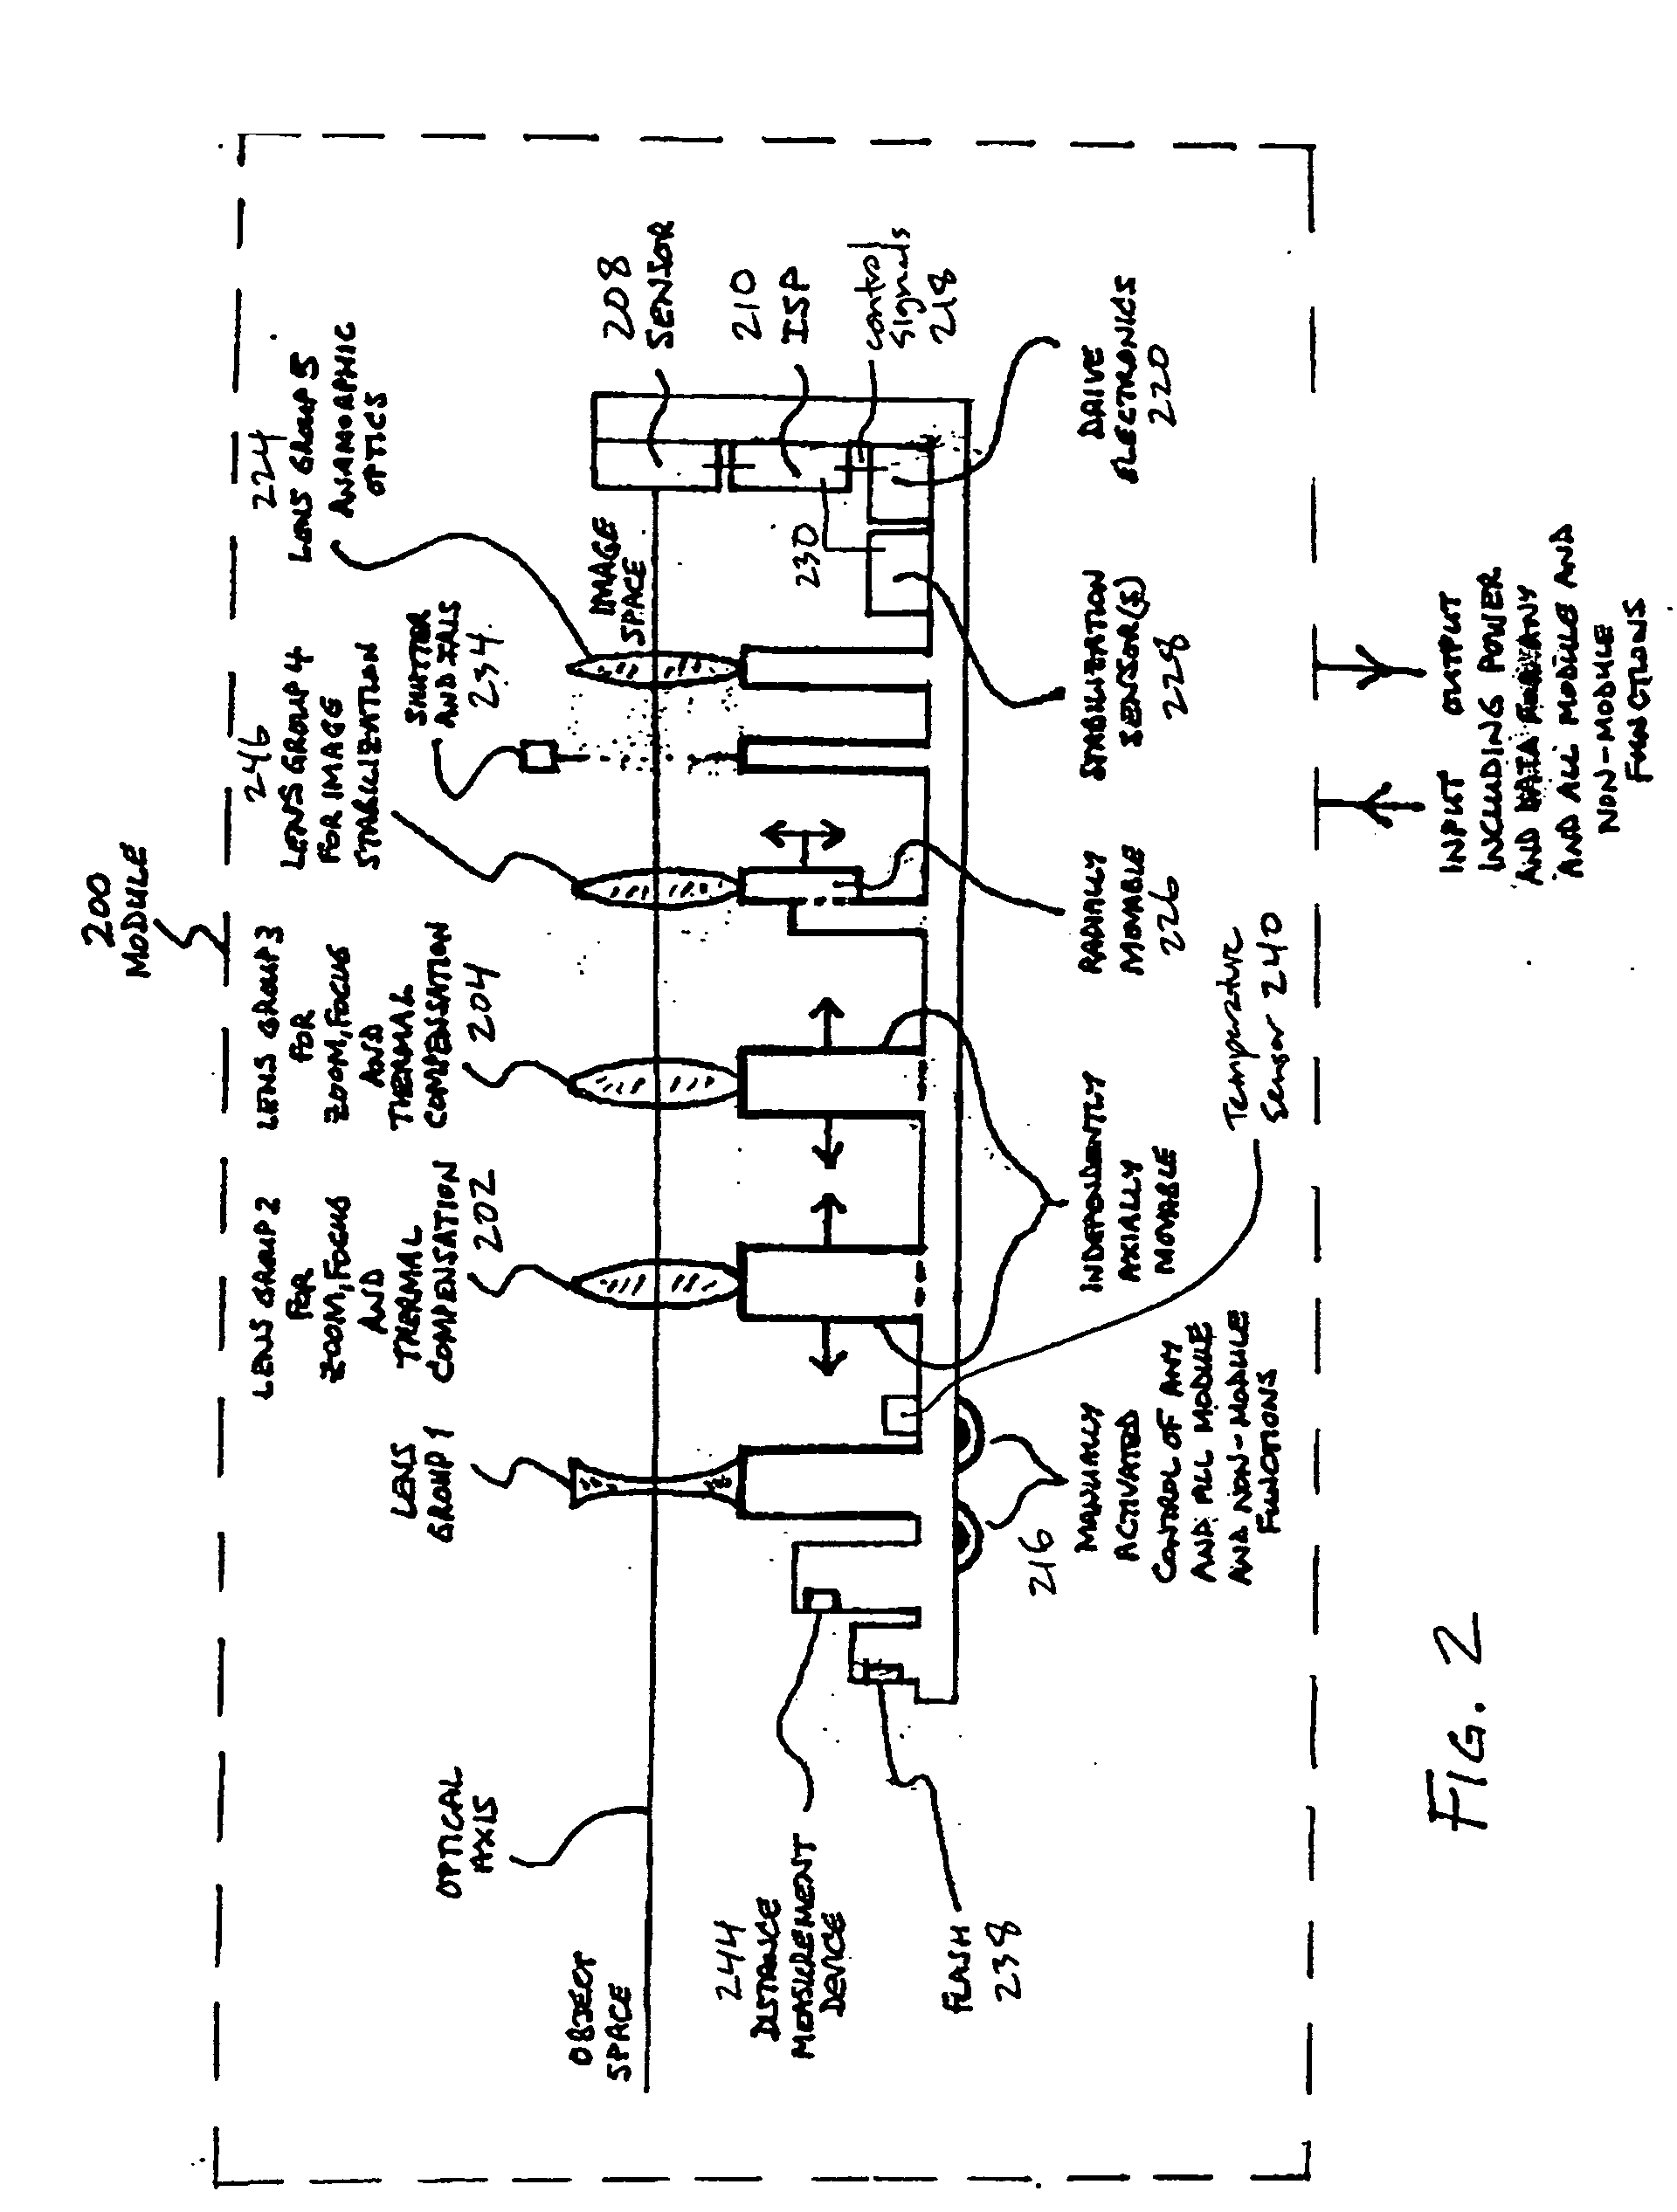 Method and apparatus for controlling a lens, and camera module incorporating same